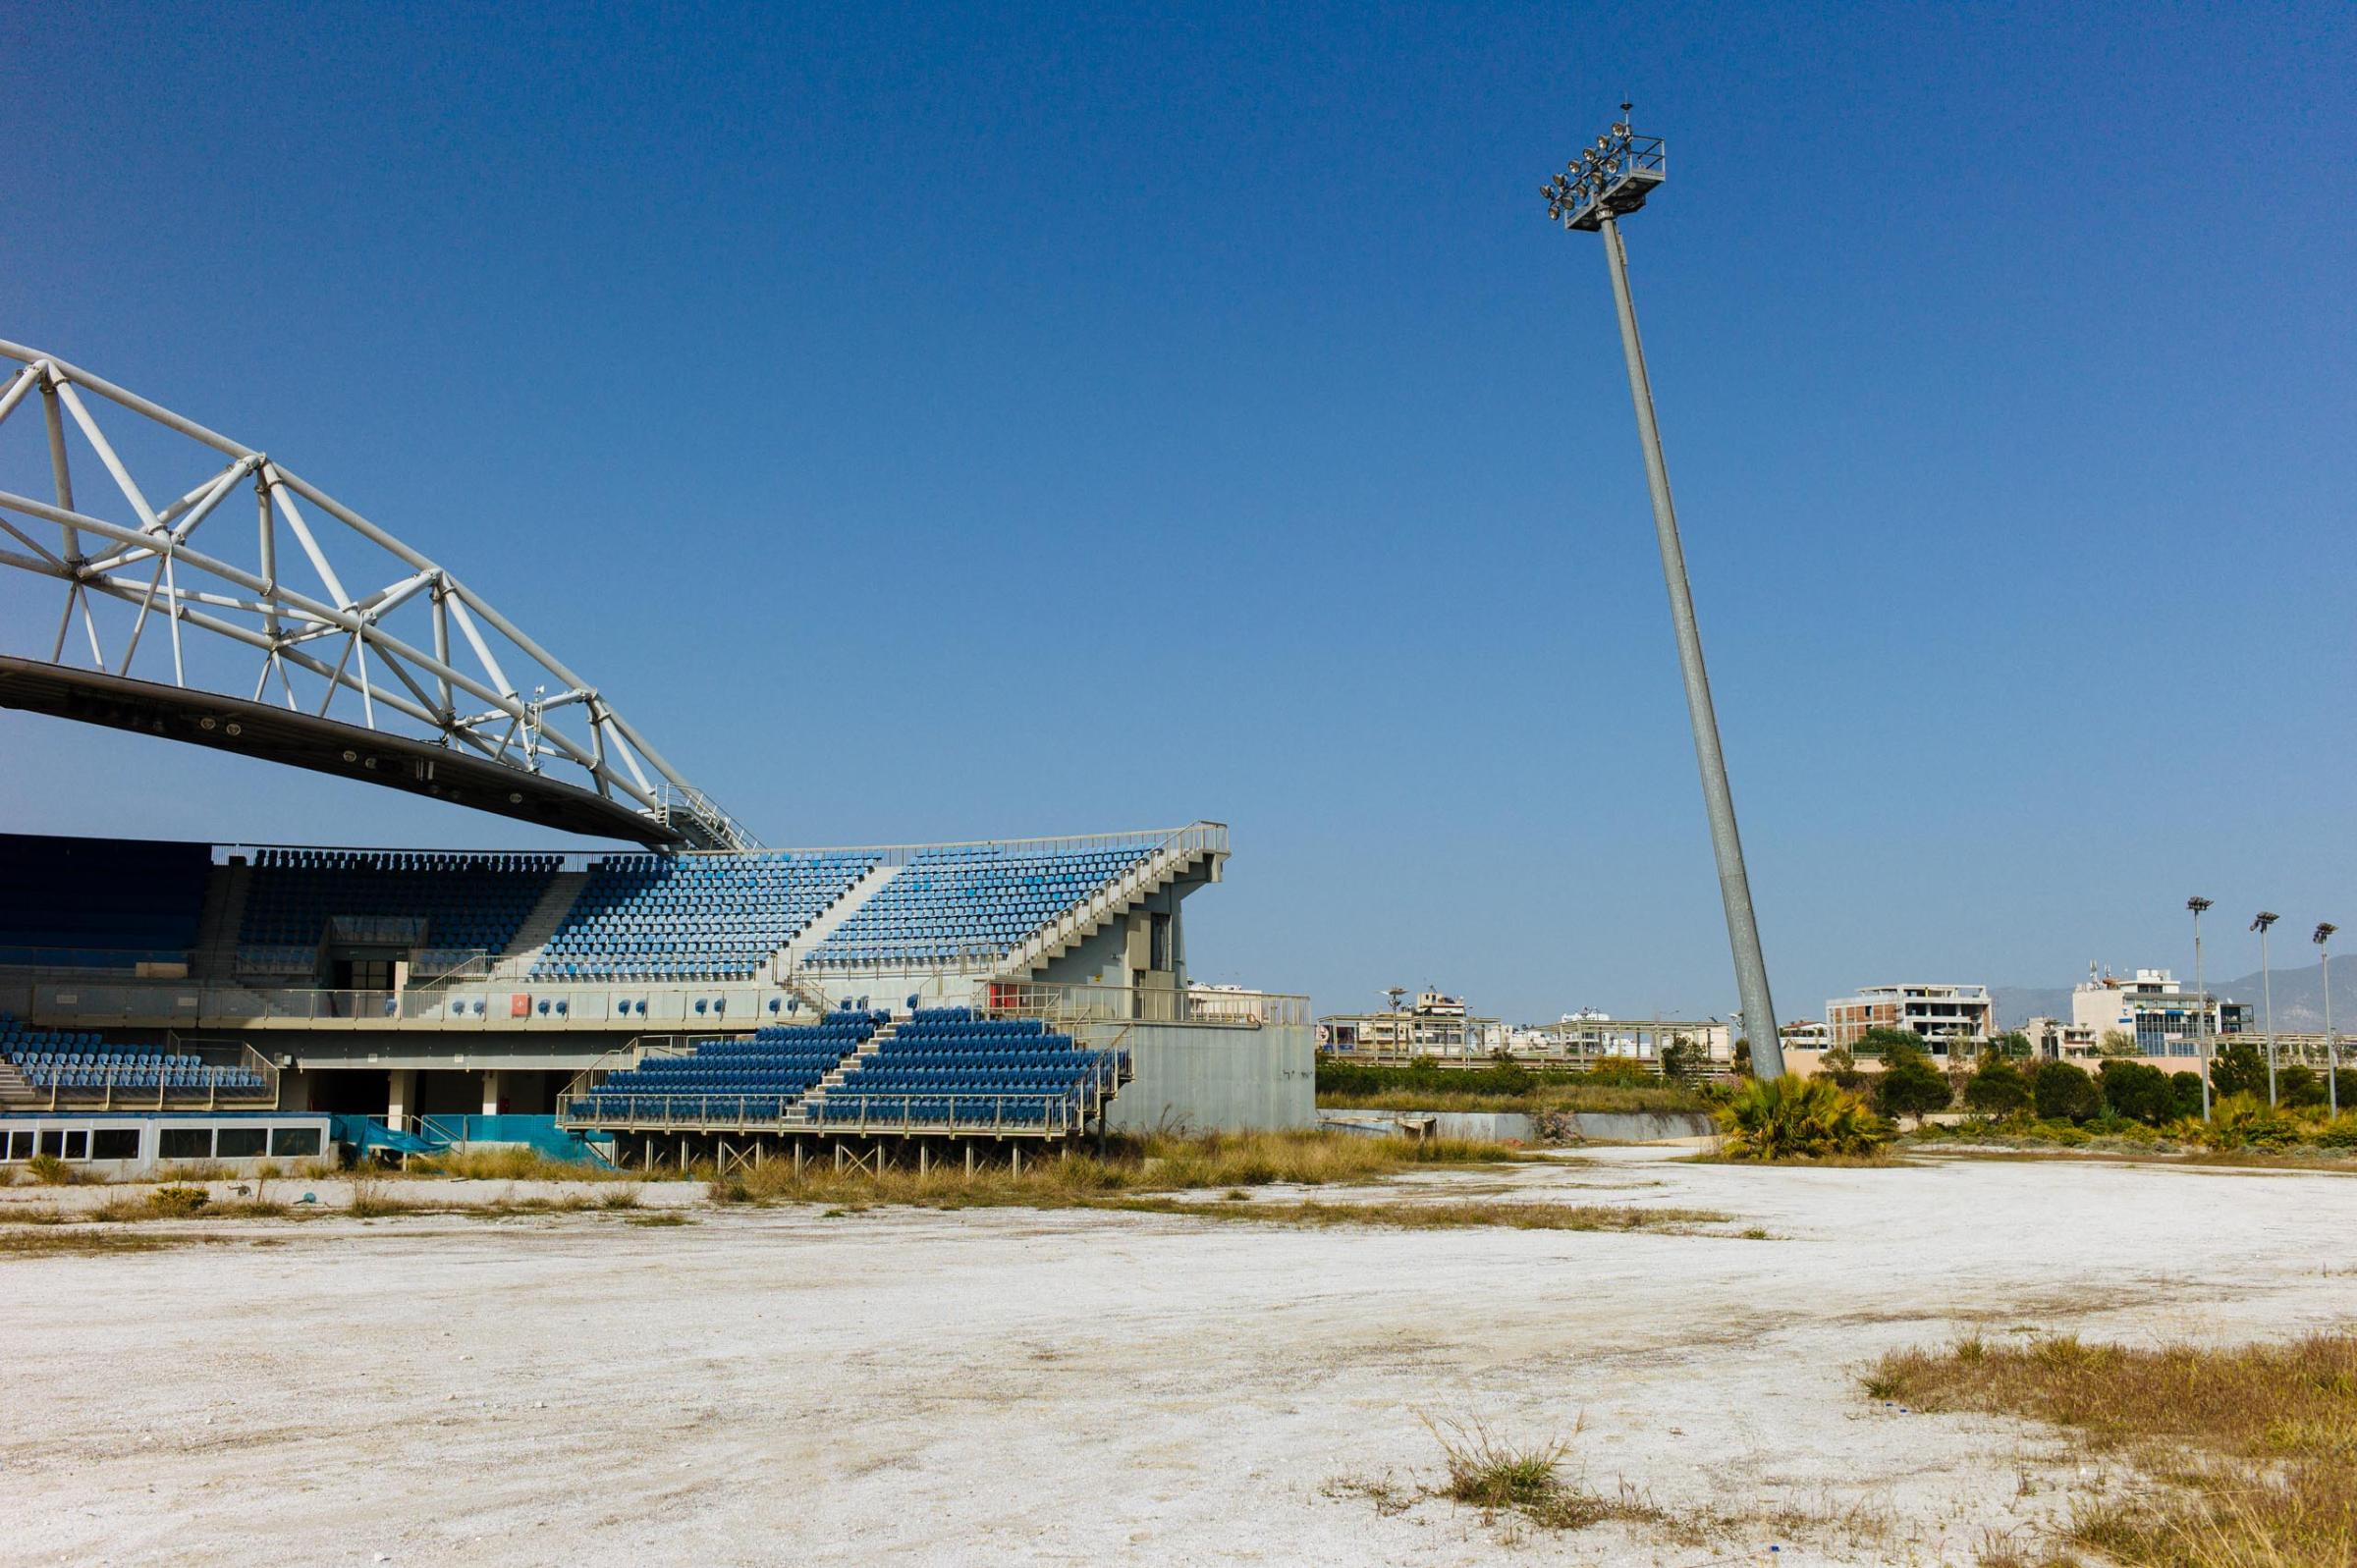 The Faliro Olympic Beach Volleyball Center in Athens, which hosted the 2004 Summer Olympics, photographed in April 2012.